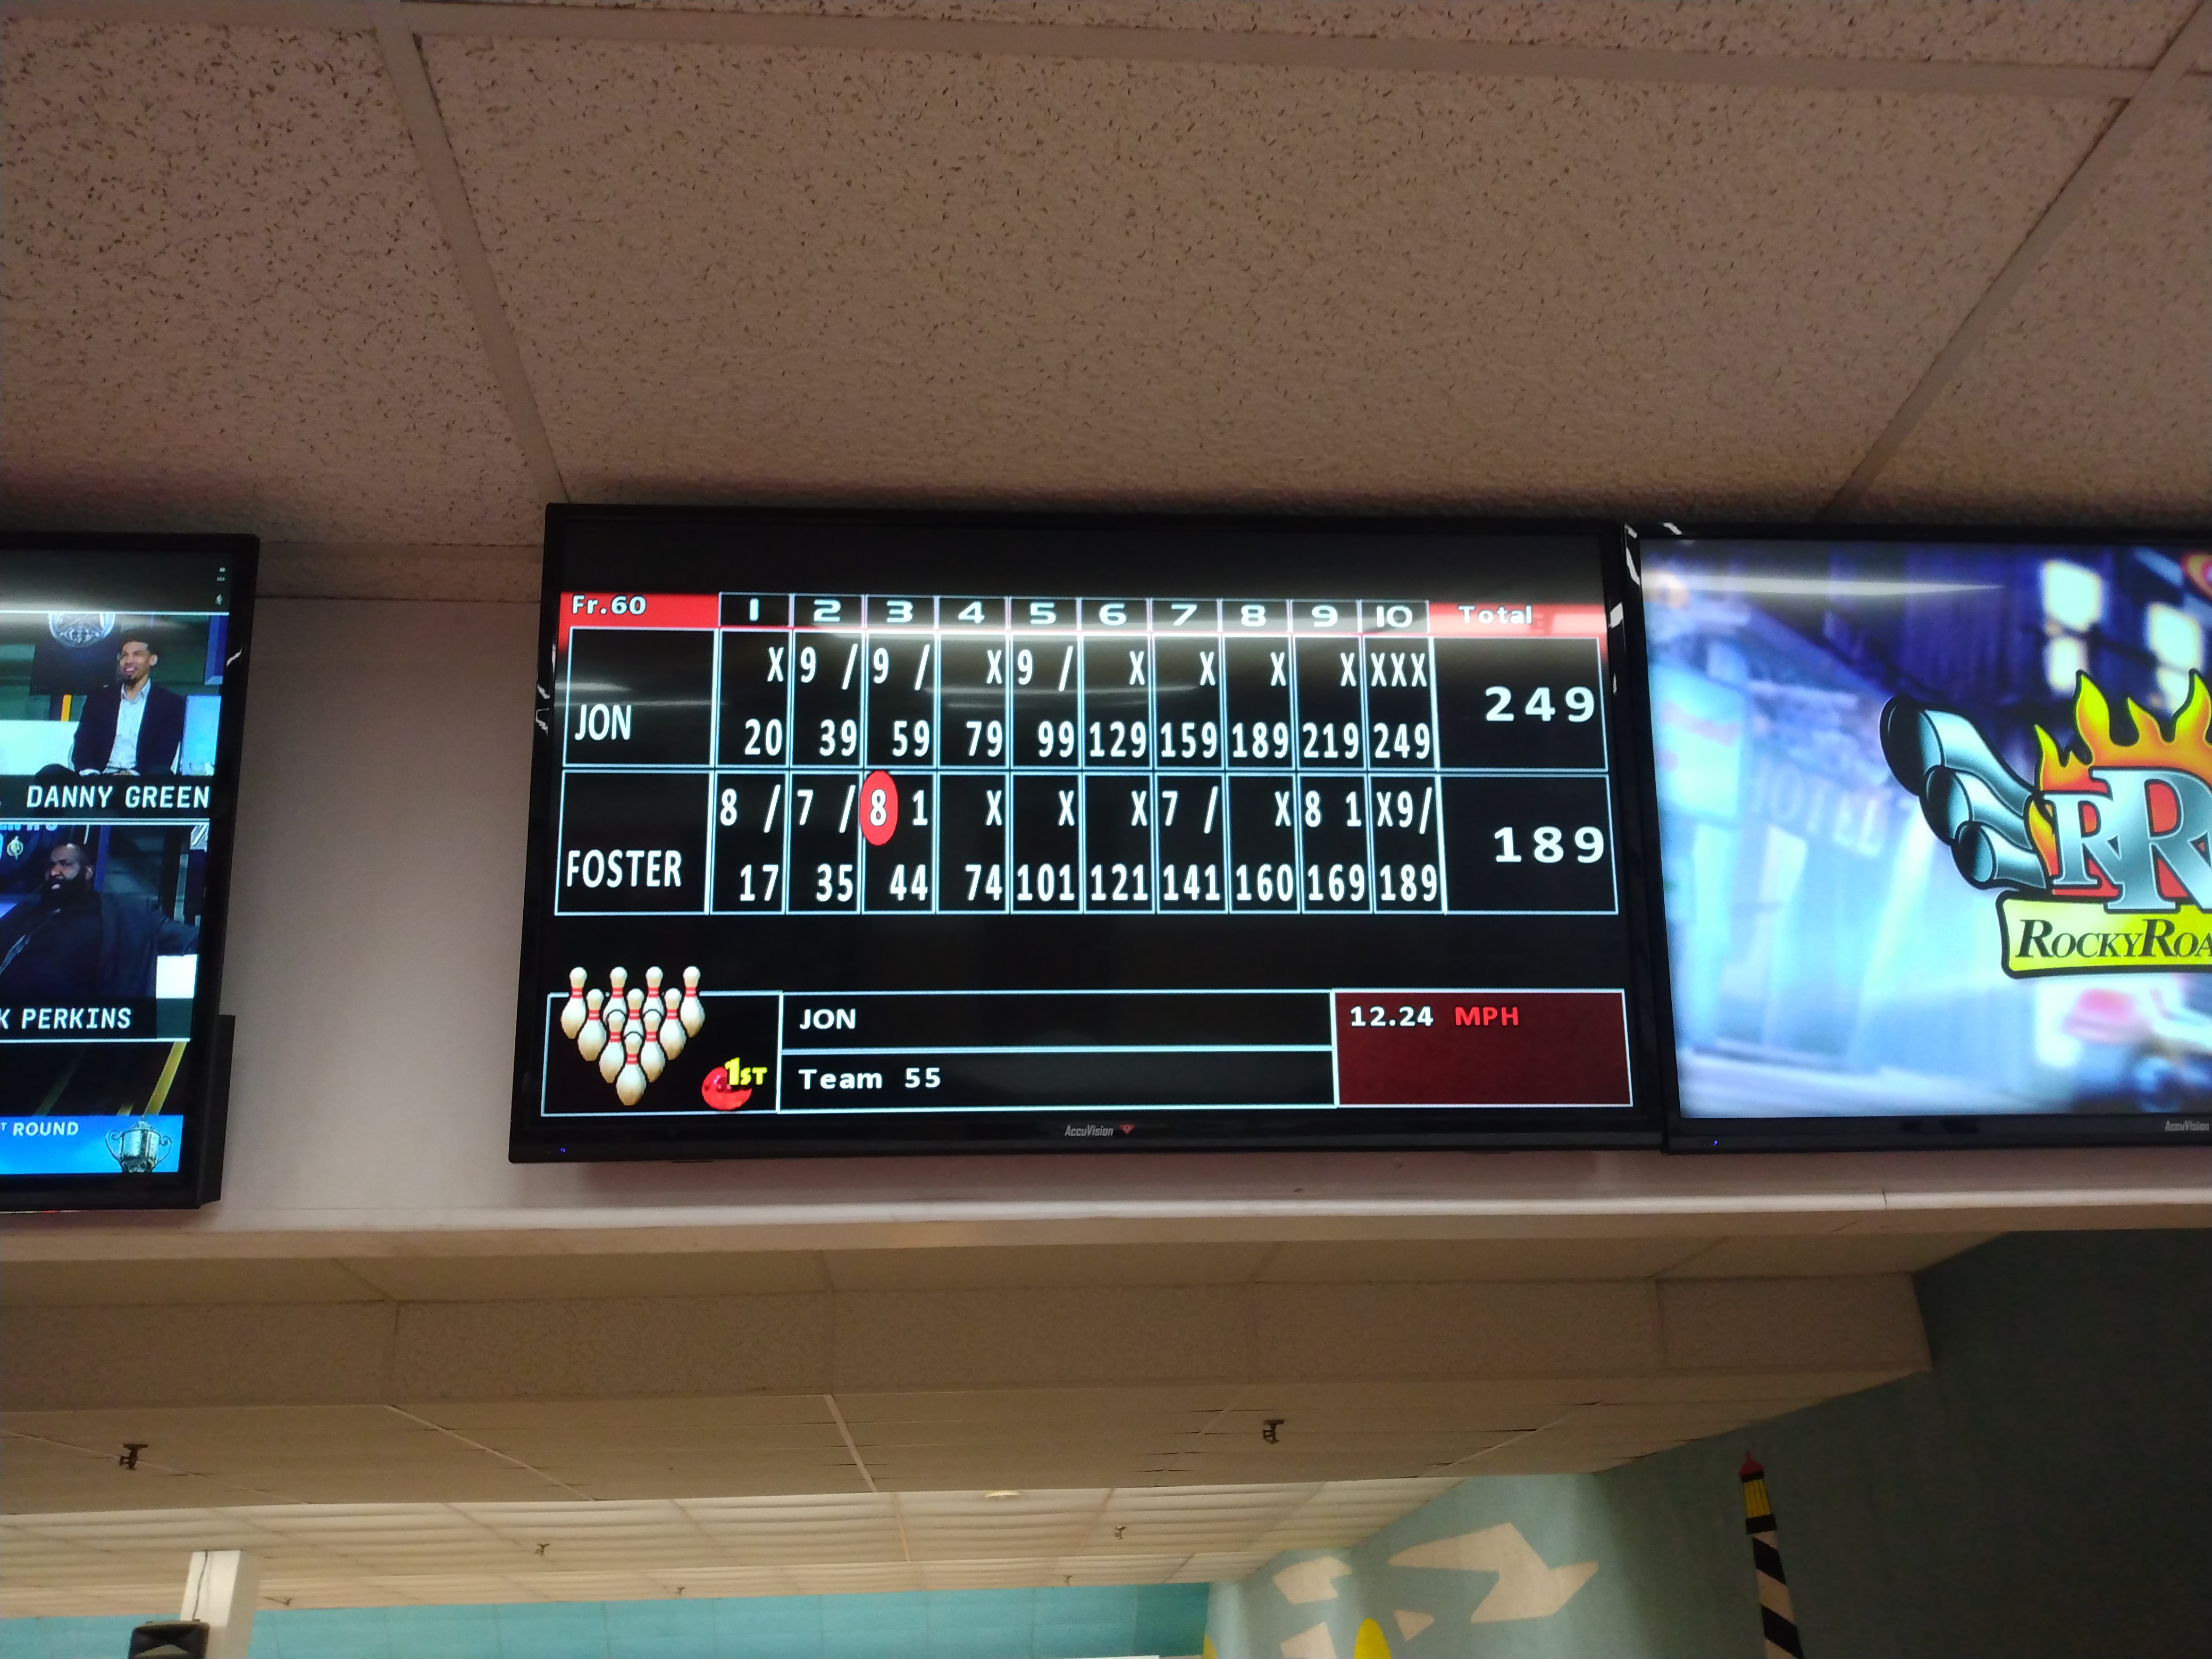 High game in a long time